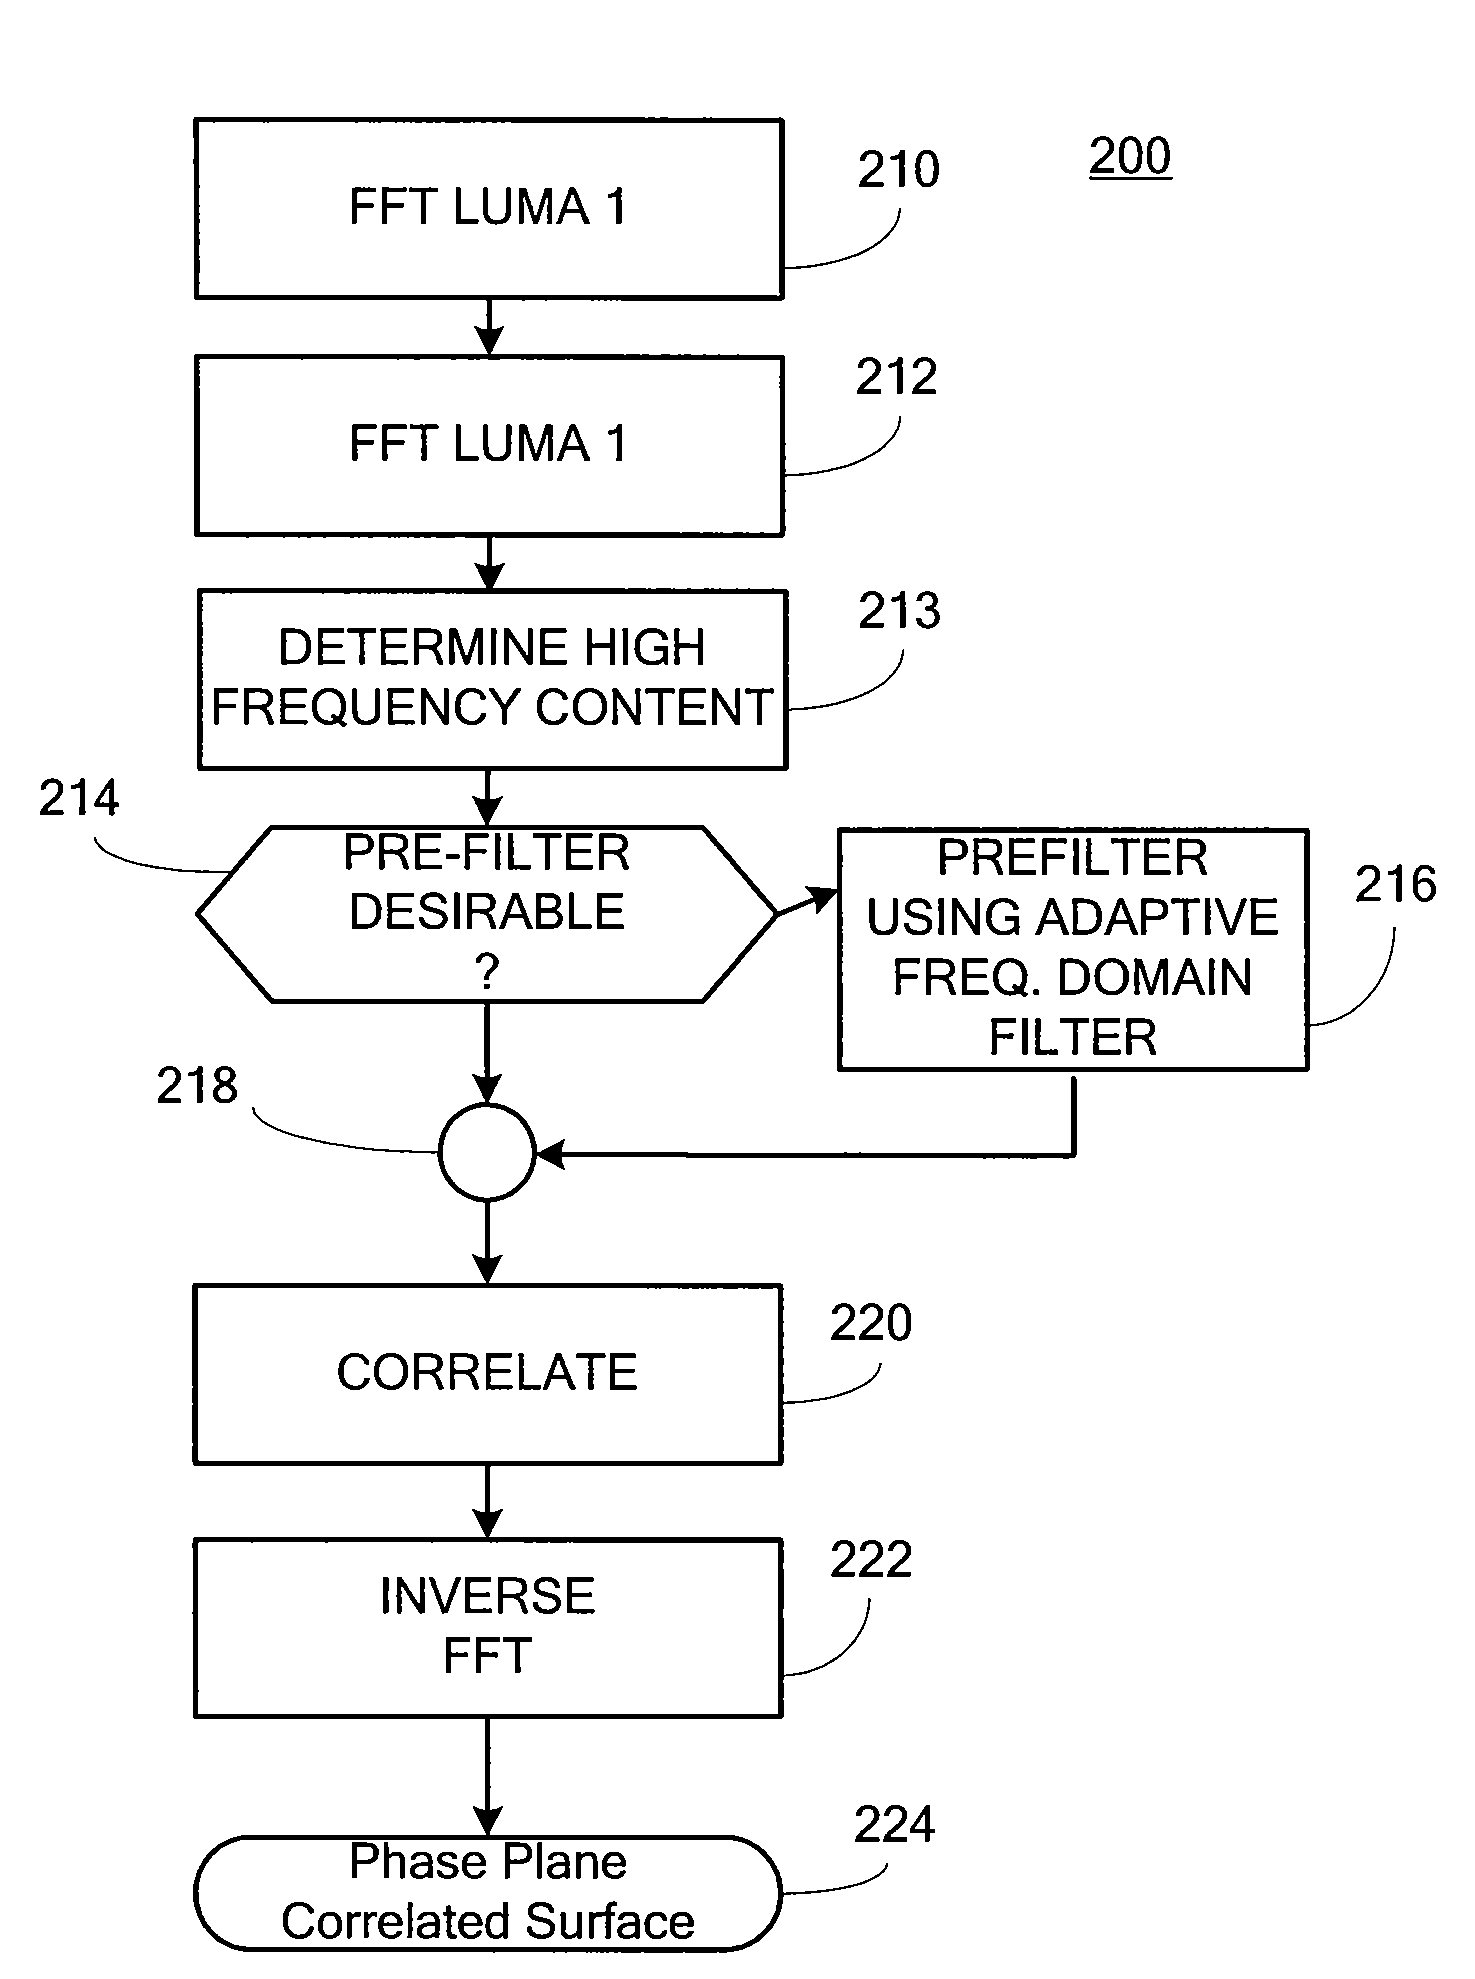 Adaptive Frequency Domain Filtering For Phase Plane Correlation